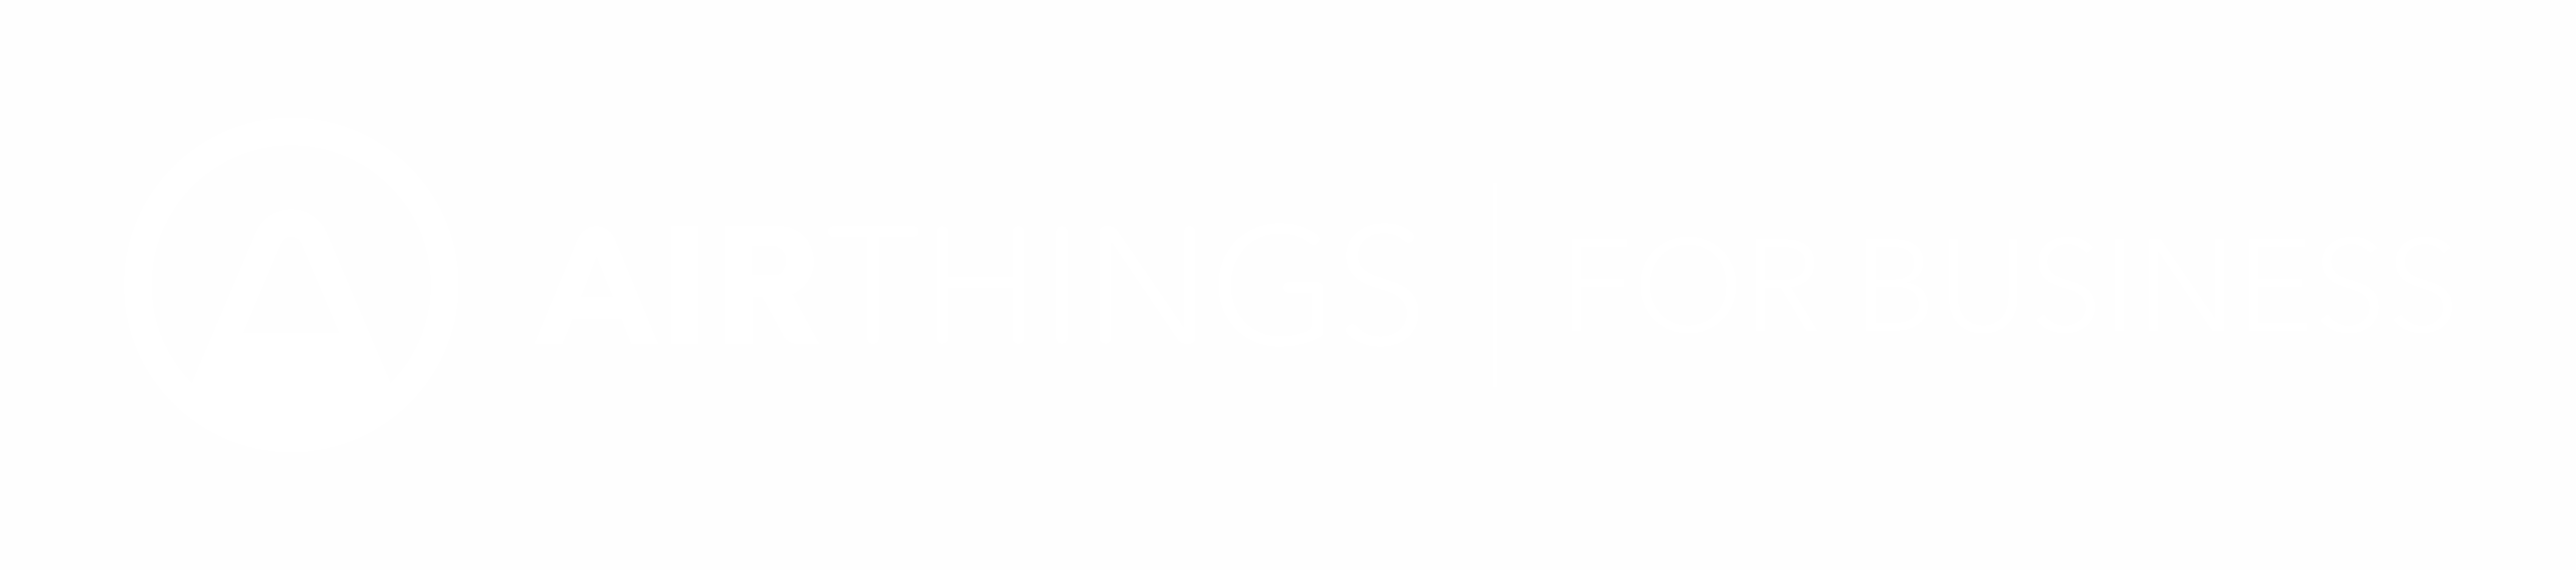 Airthings for Business LOGO - Horizontal - White - With Margin